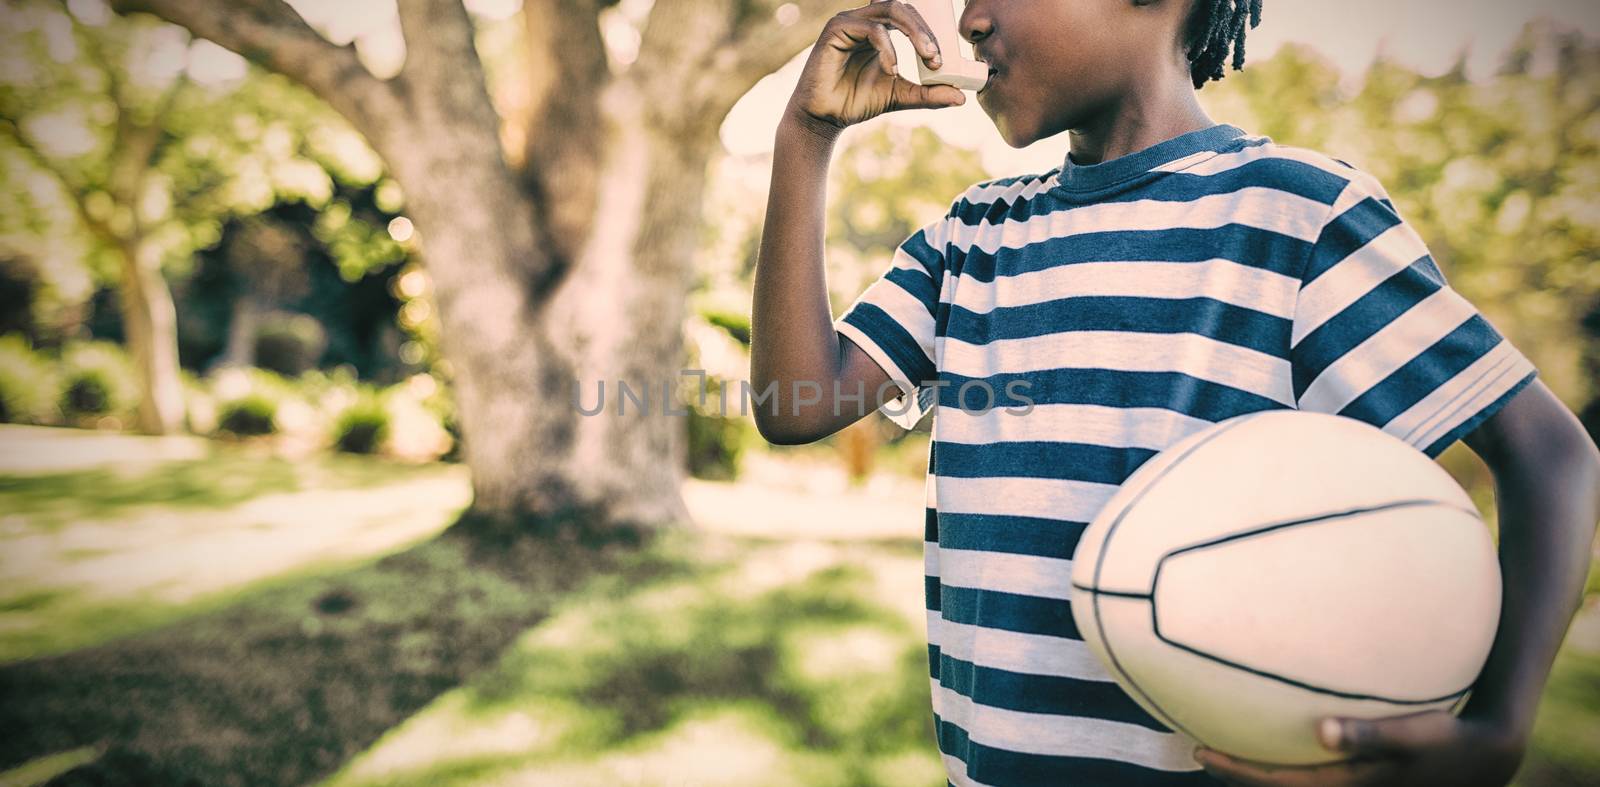 Boy using asthma inhaler in the park on a sunny day